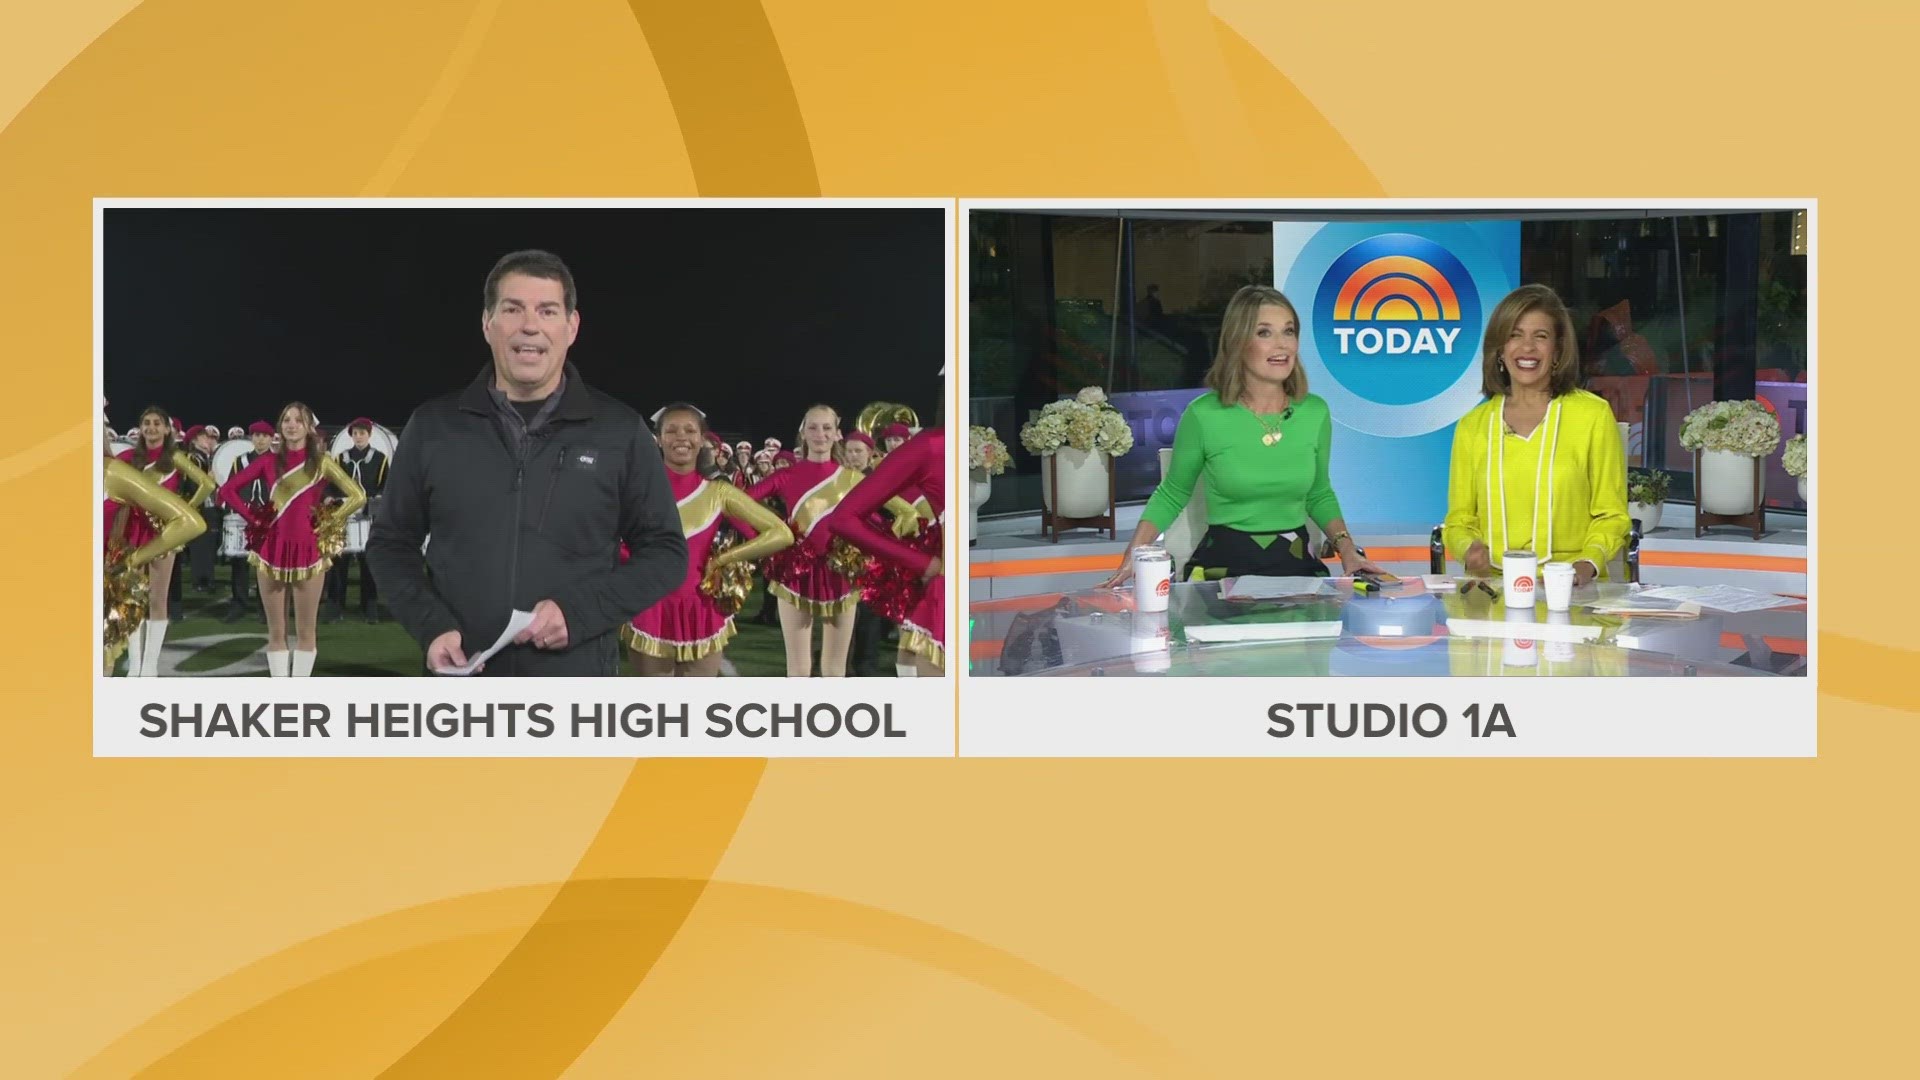 As Shaker Heights High School prepares to be live on national TV on the 'TODAY' show, we were joined by Savannah Guthrie and Hoda Kotb for a special sneak peek.